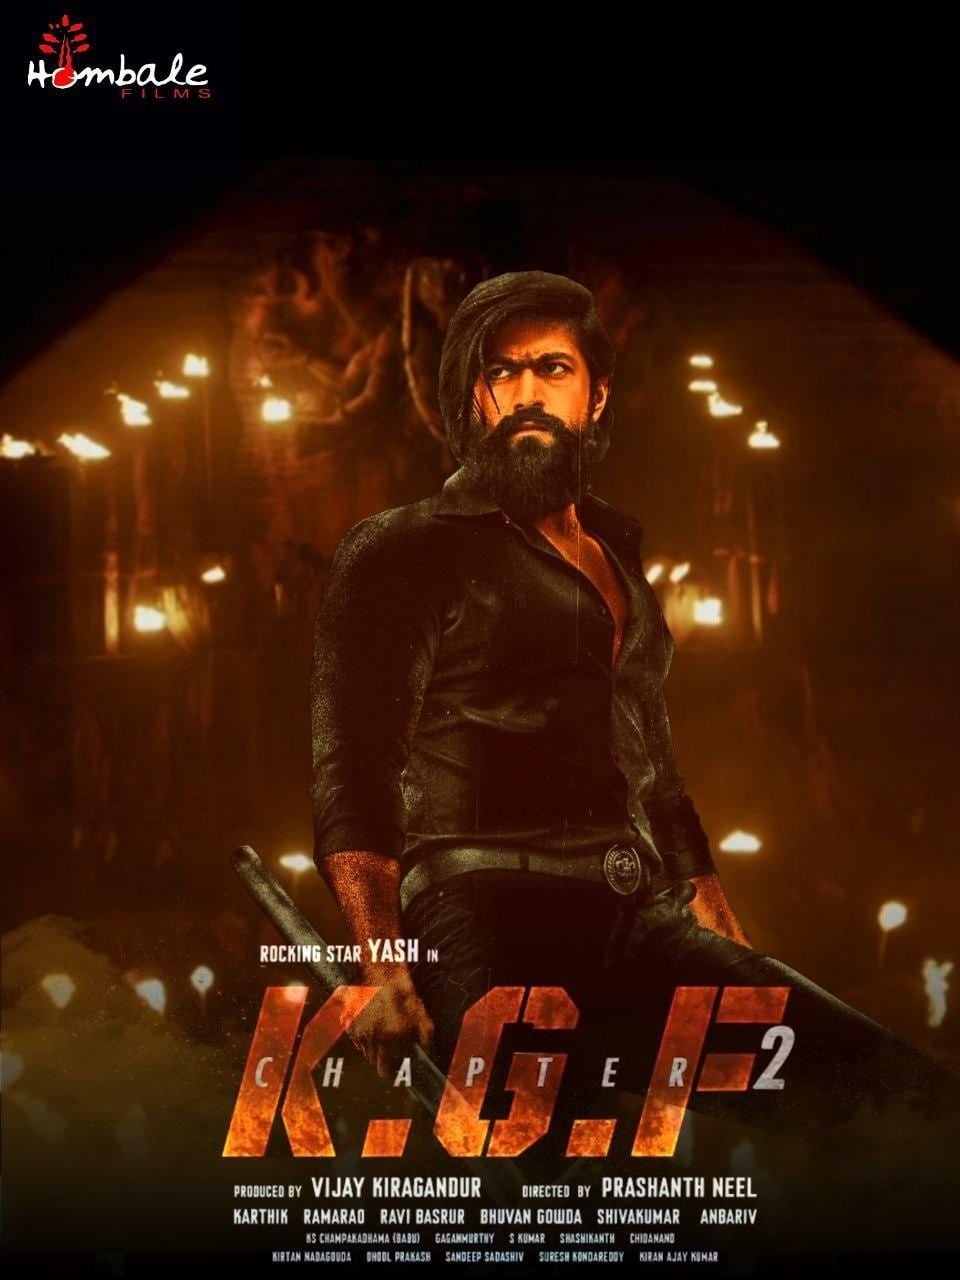 Poster for the movie "KGF Chapter 2"